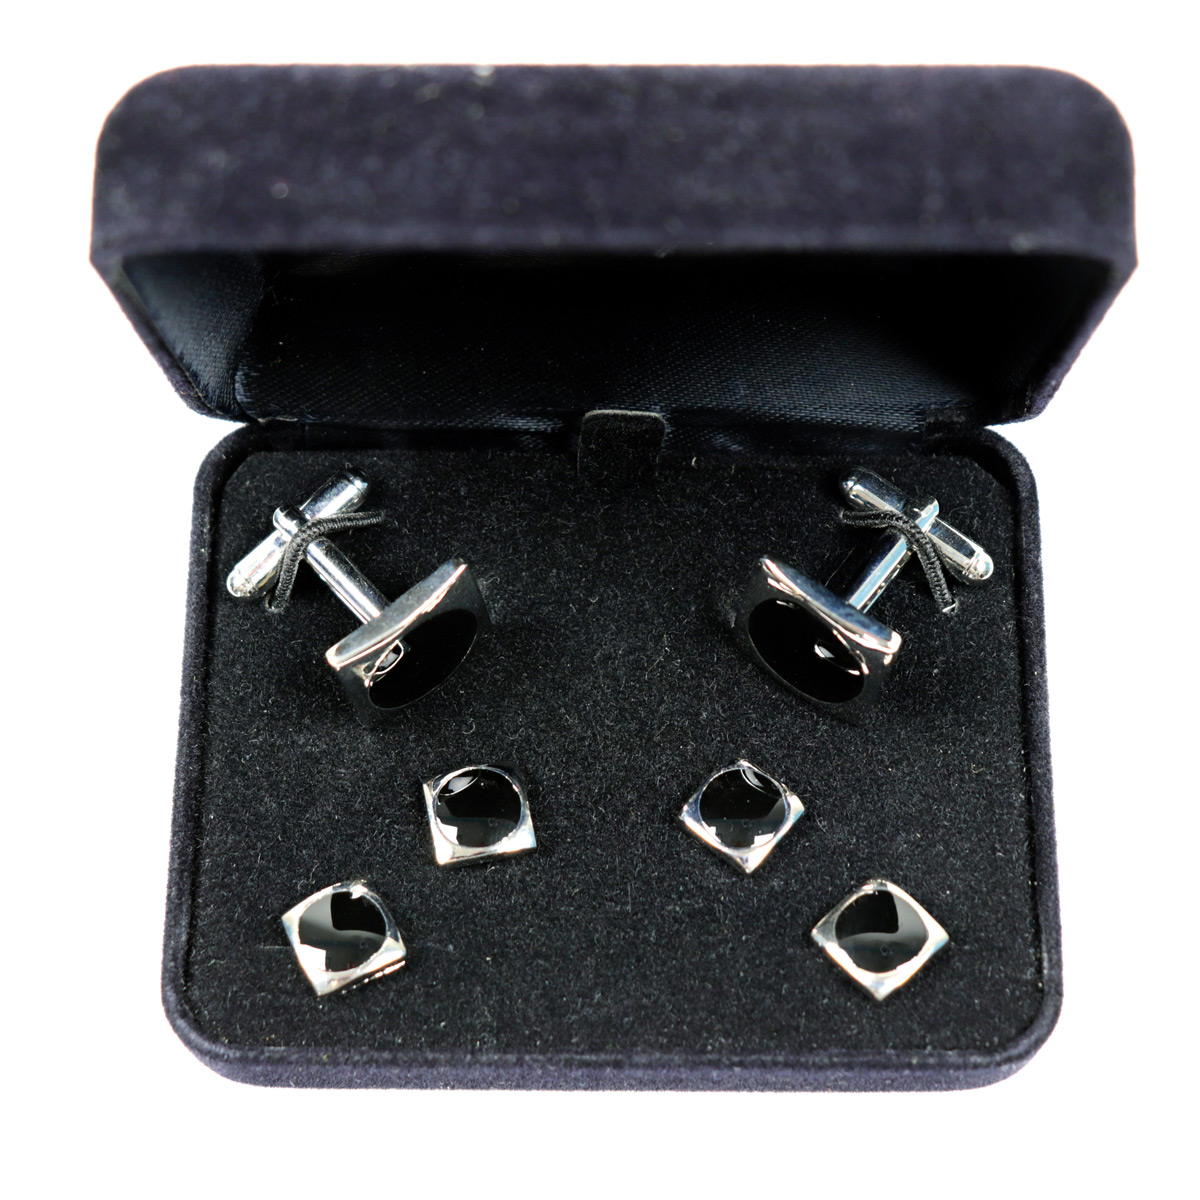 Cufflinks Studs Faux Onyx Square Cuff Links Set Silver by Tuxedos Online